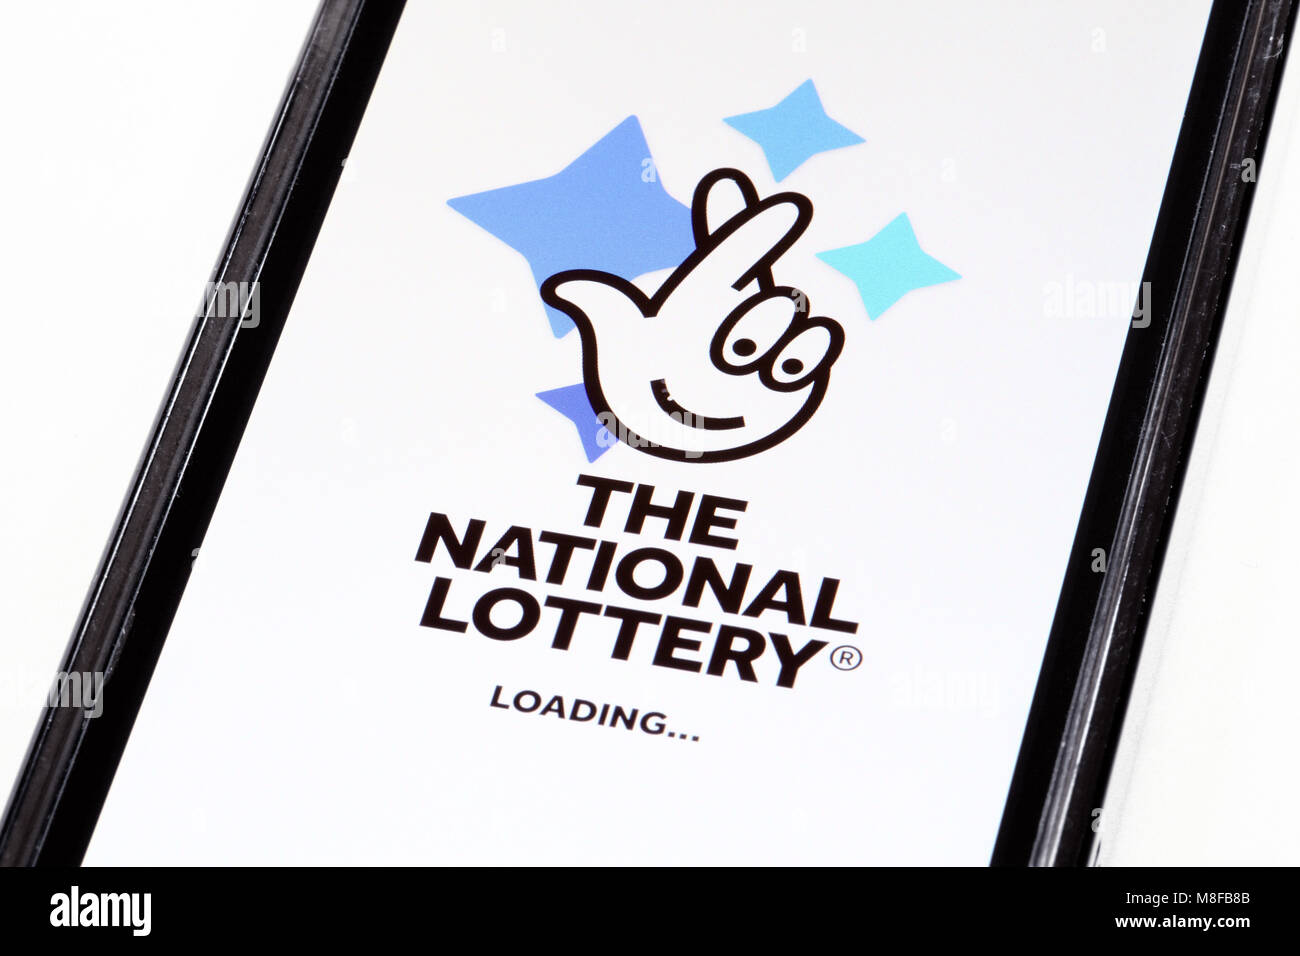 The National Lottery logo and mobile phone app / application. Stock Photo